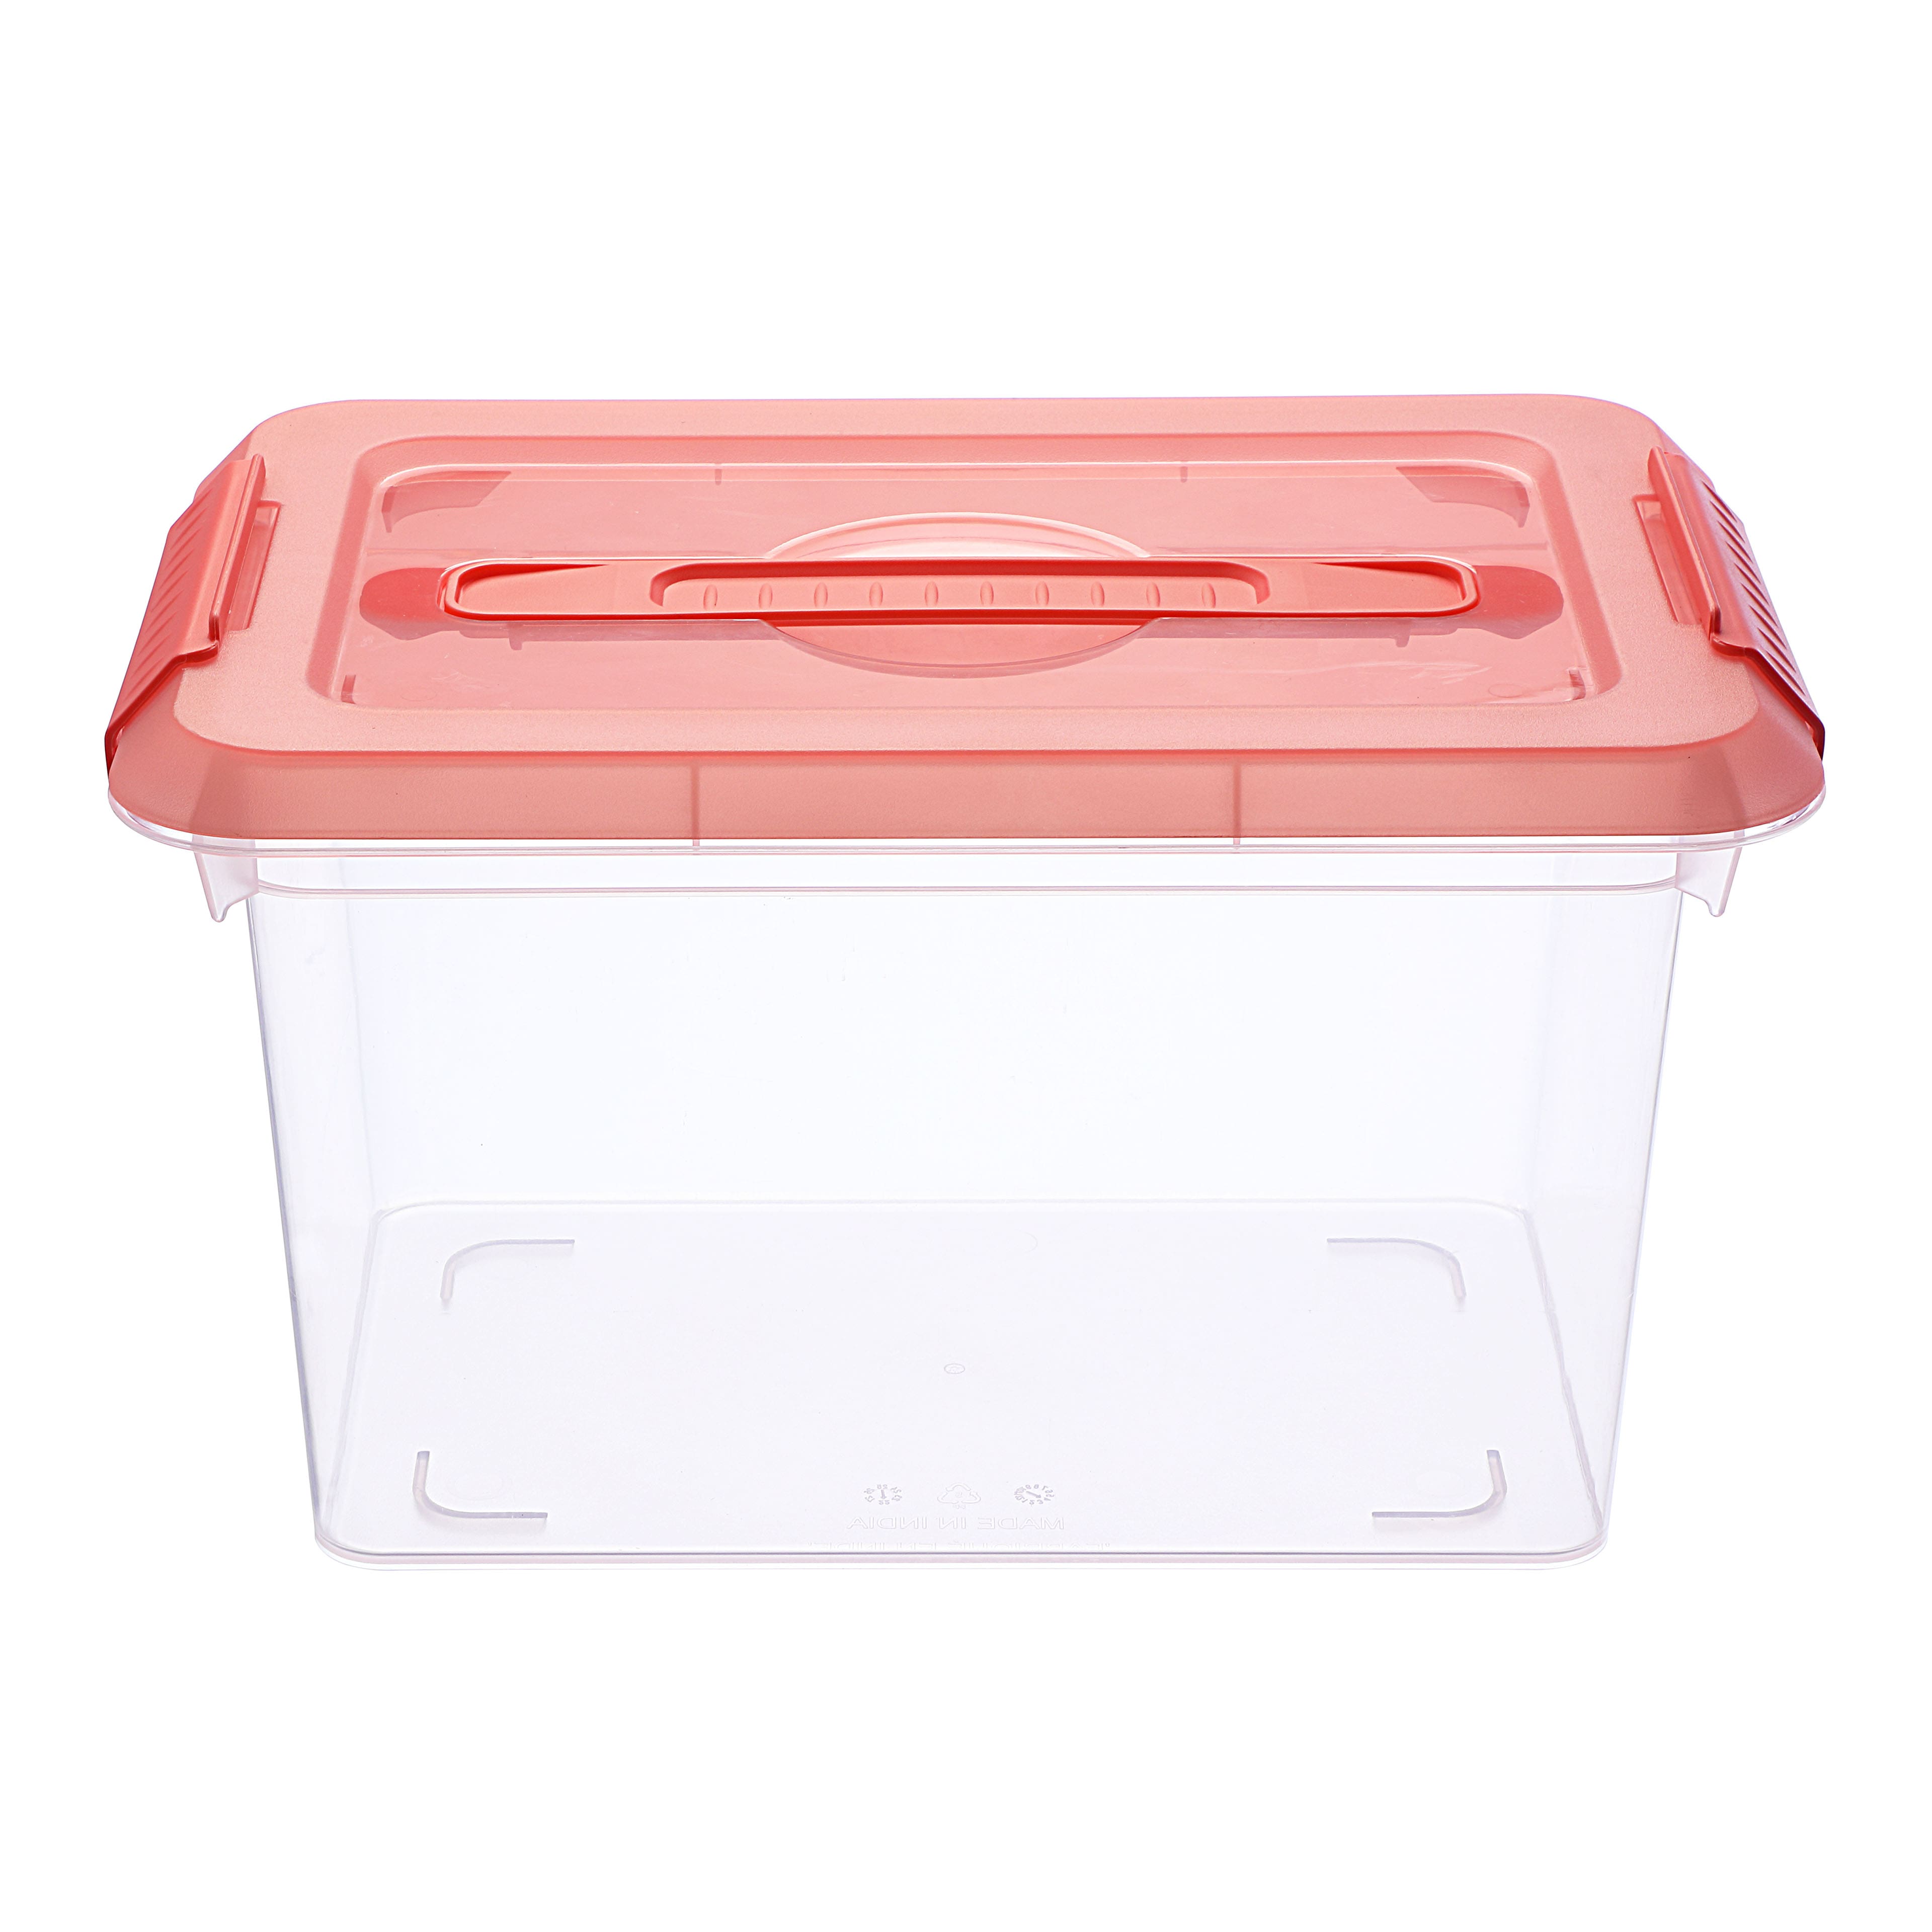 50% OFF on HOKIPO� Clear Plastic Small Storage Boxes with